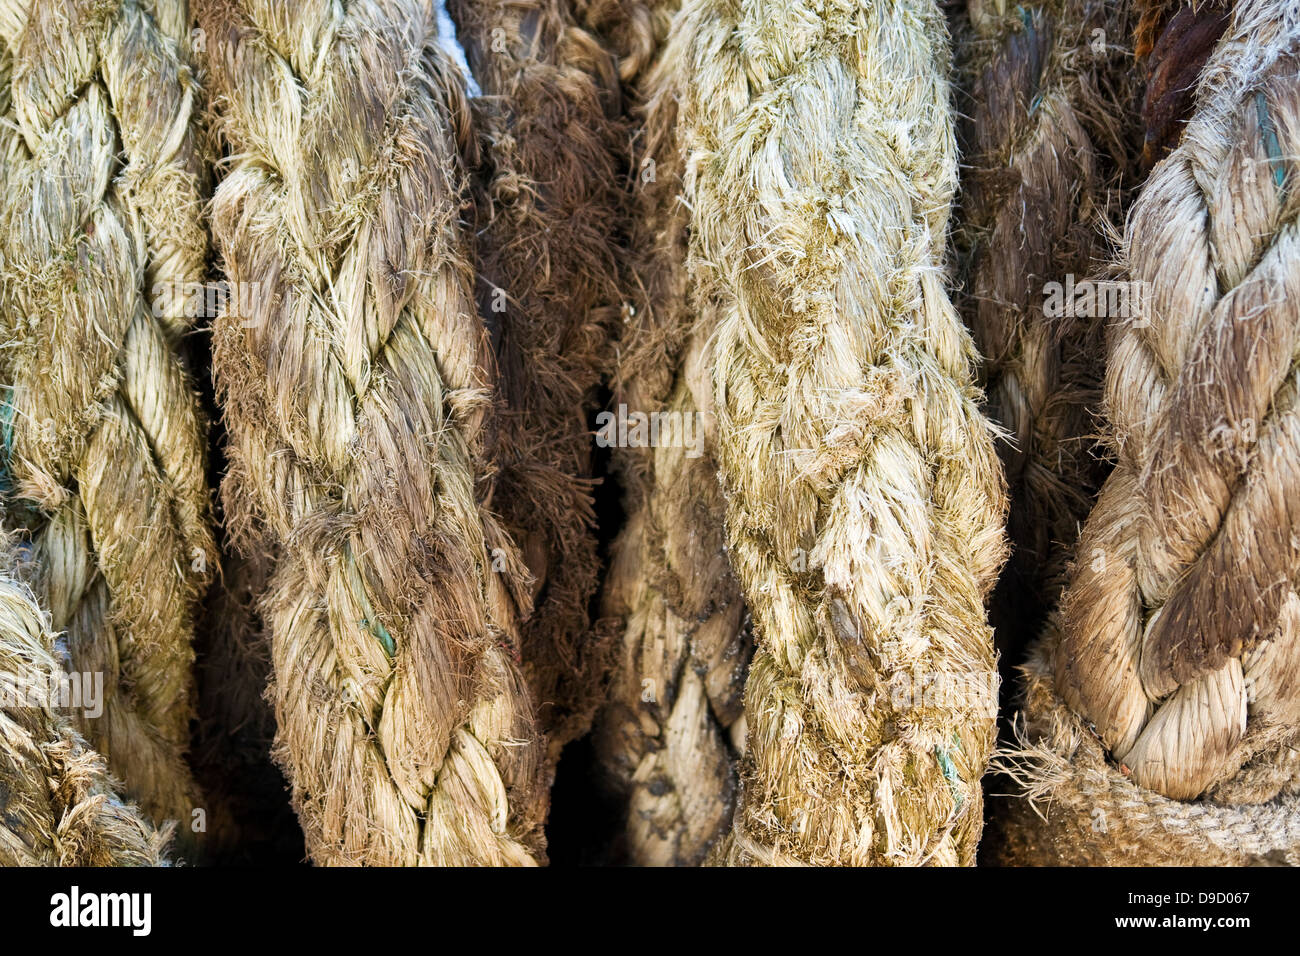 Rolled up ropes Stock Photo